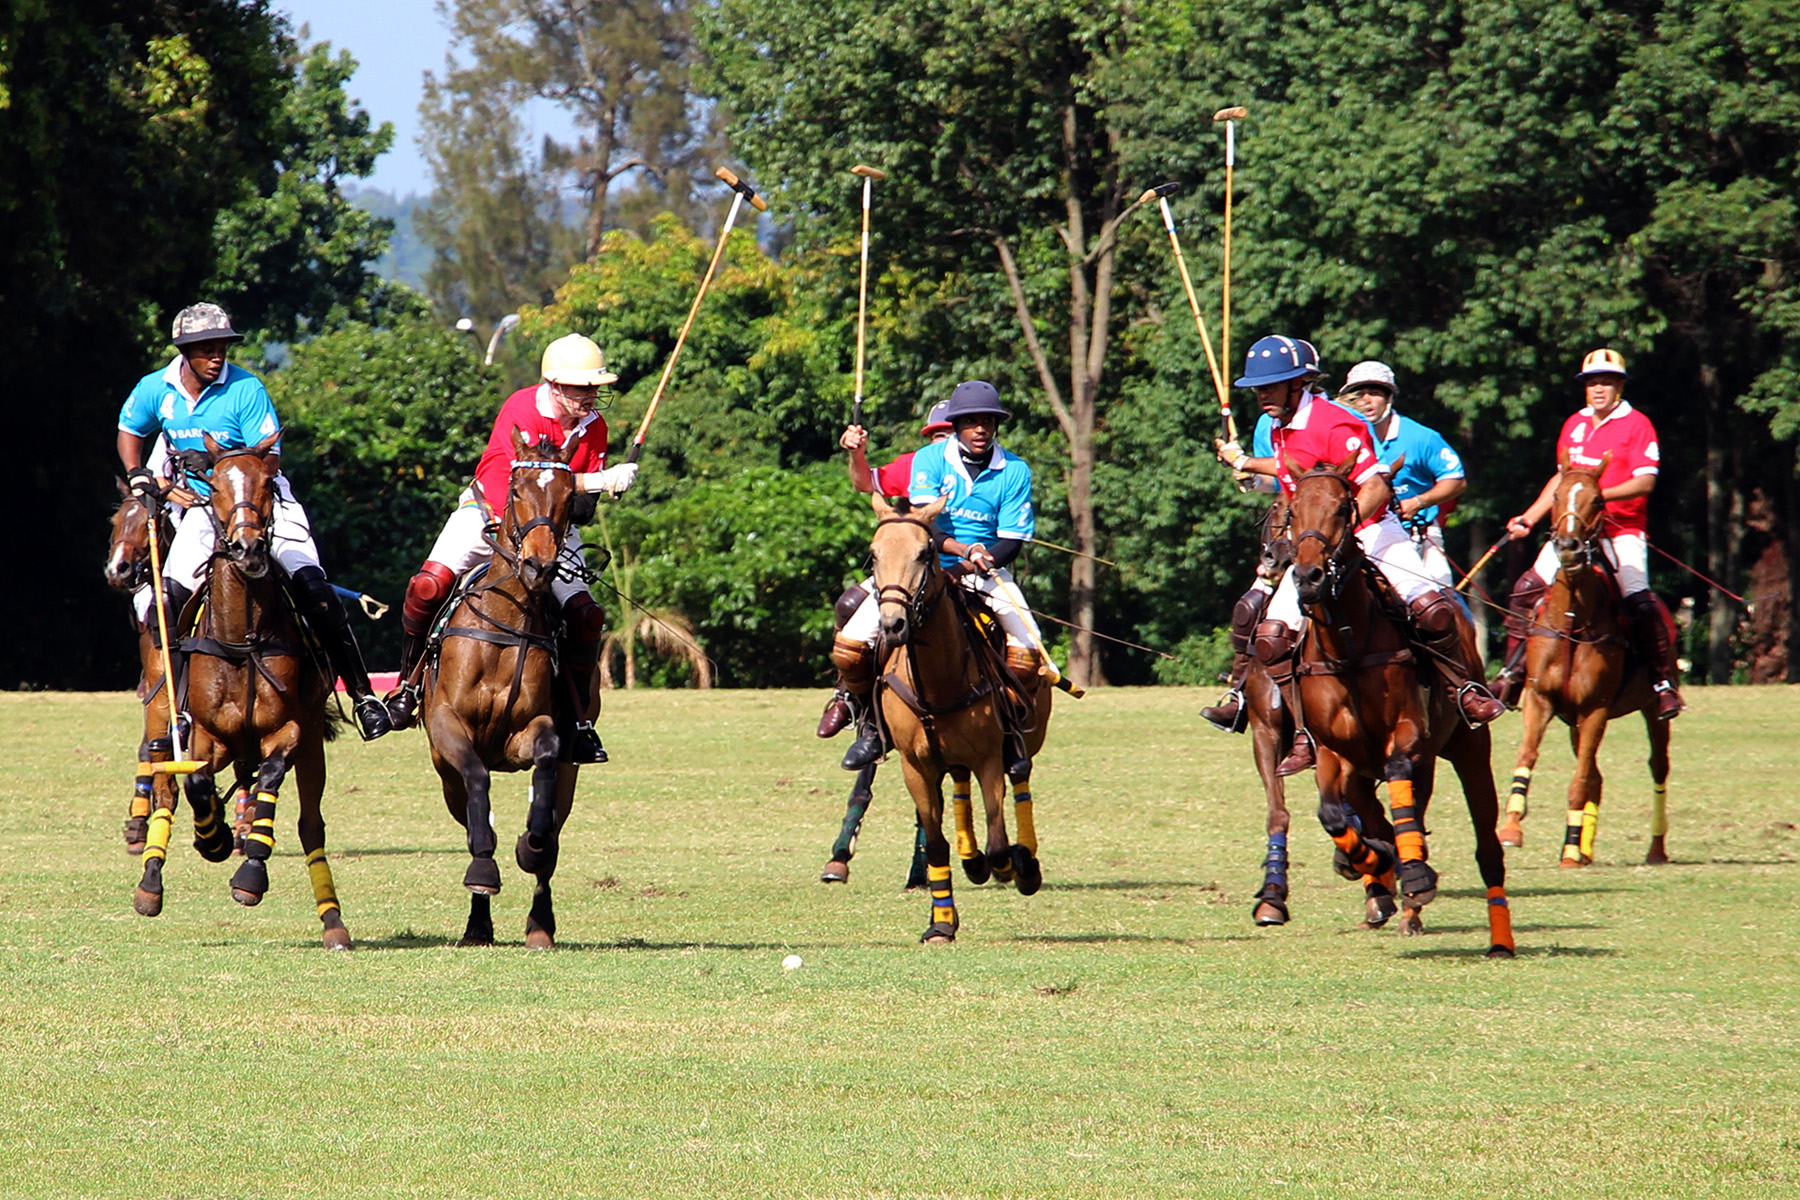 The Polo game between Barclays and Shell V-Power. 